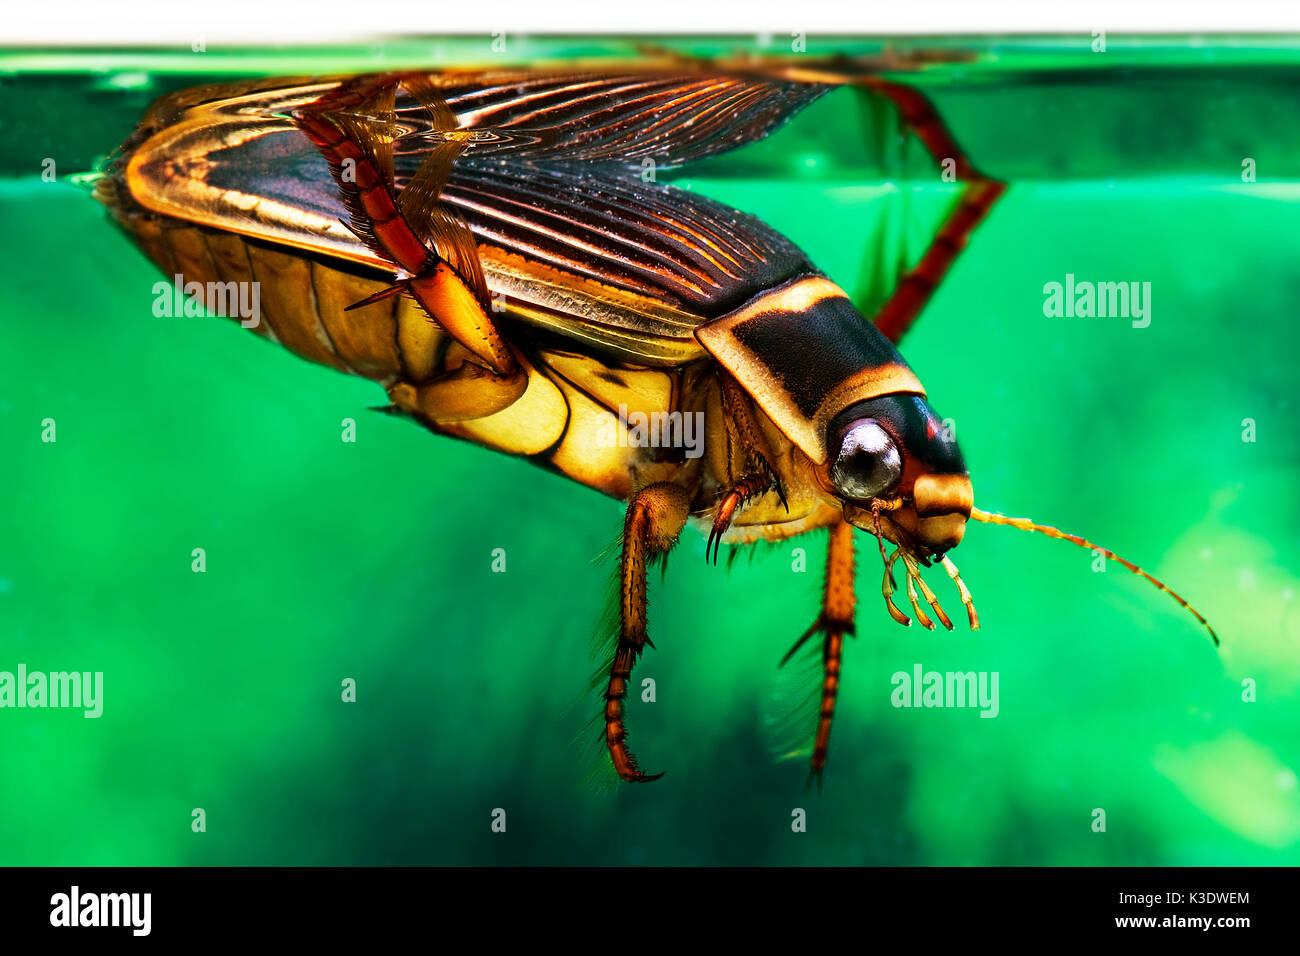 great diving beetle, Dytiscus boarderalis, water, medium close-up, Stock Photo